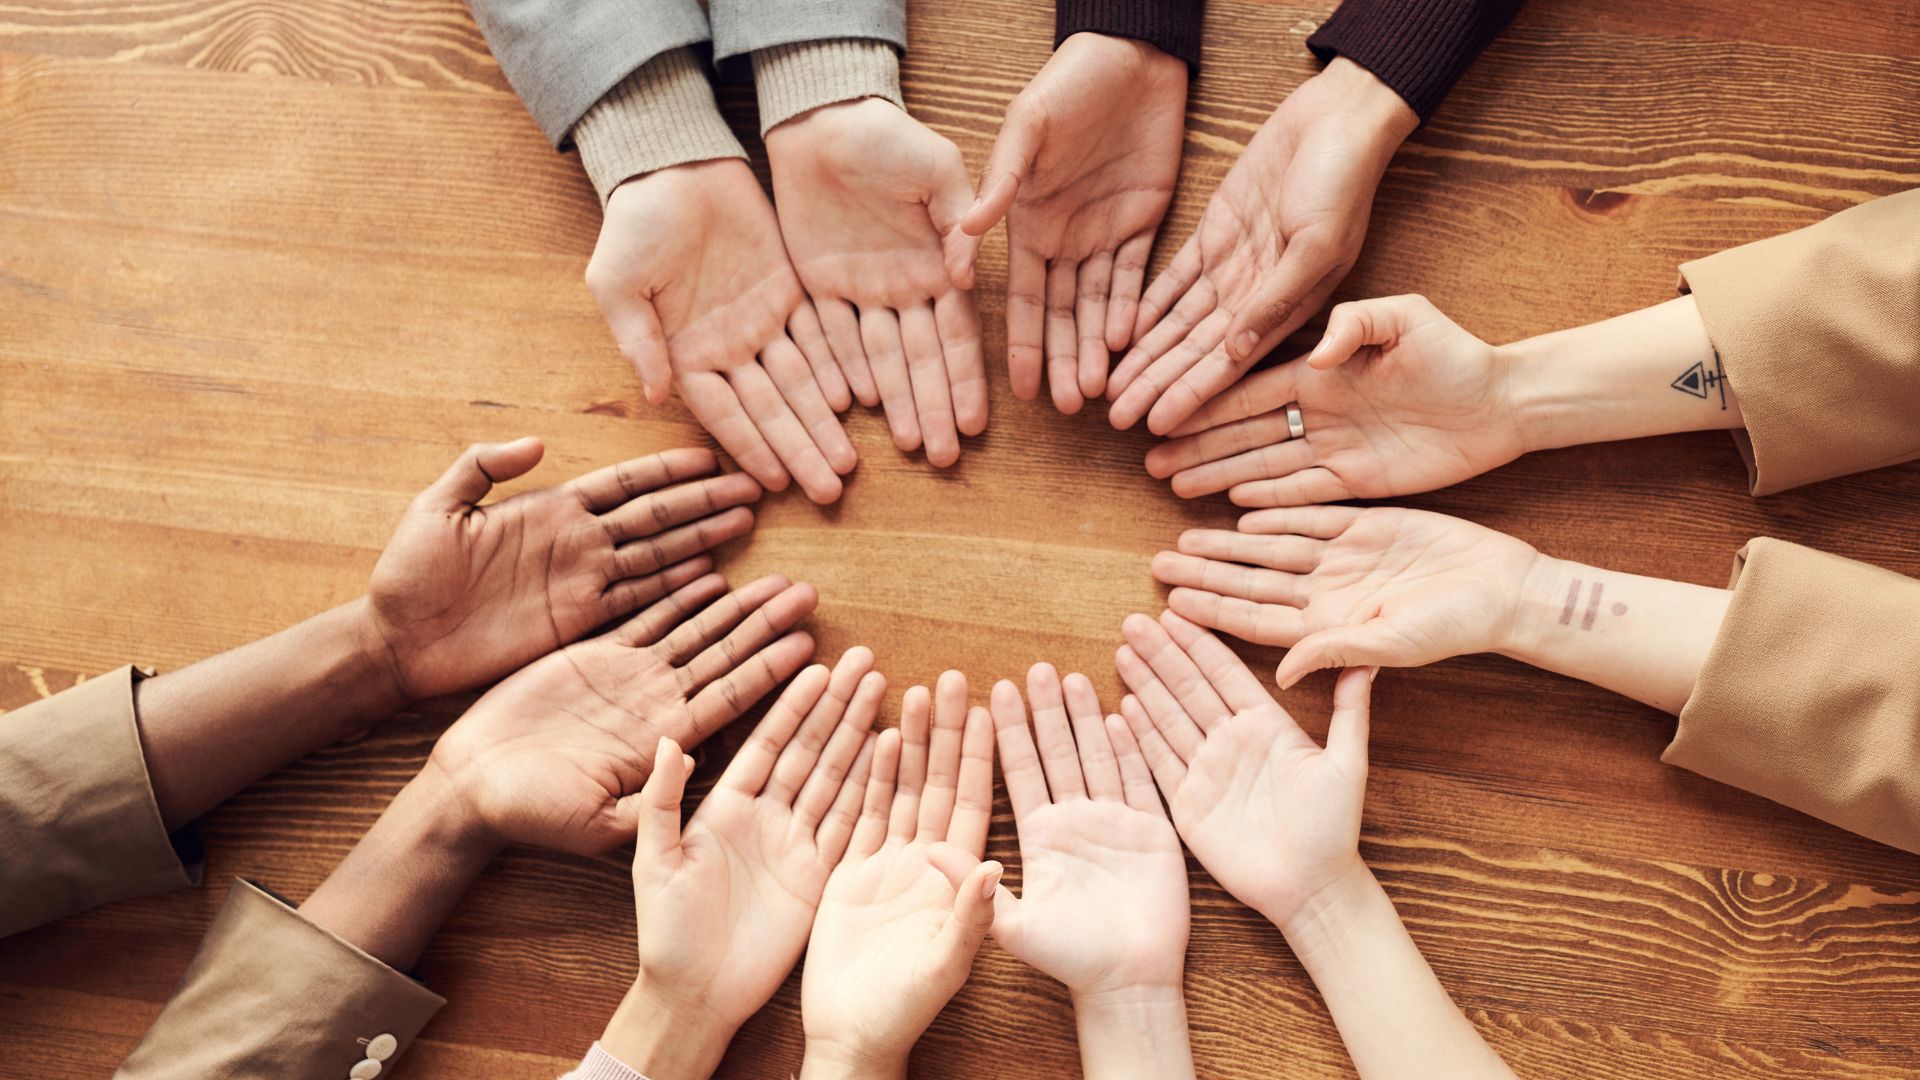 An image of six pairs of hands forming a circle with their palms facing up on the table.